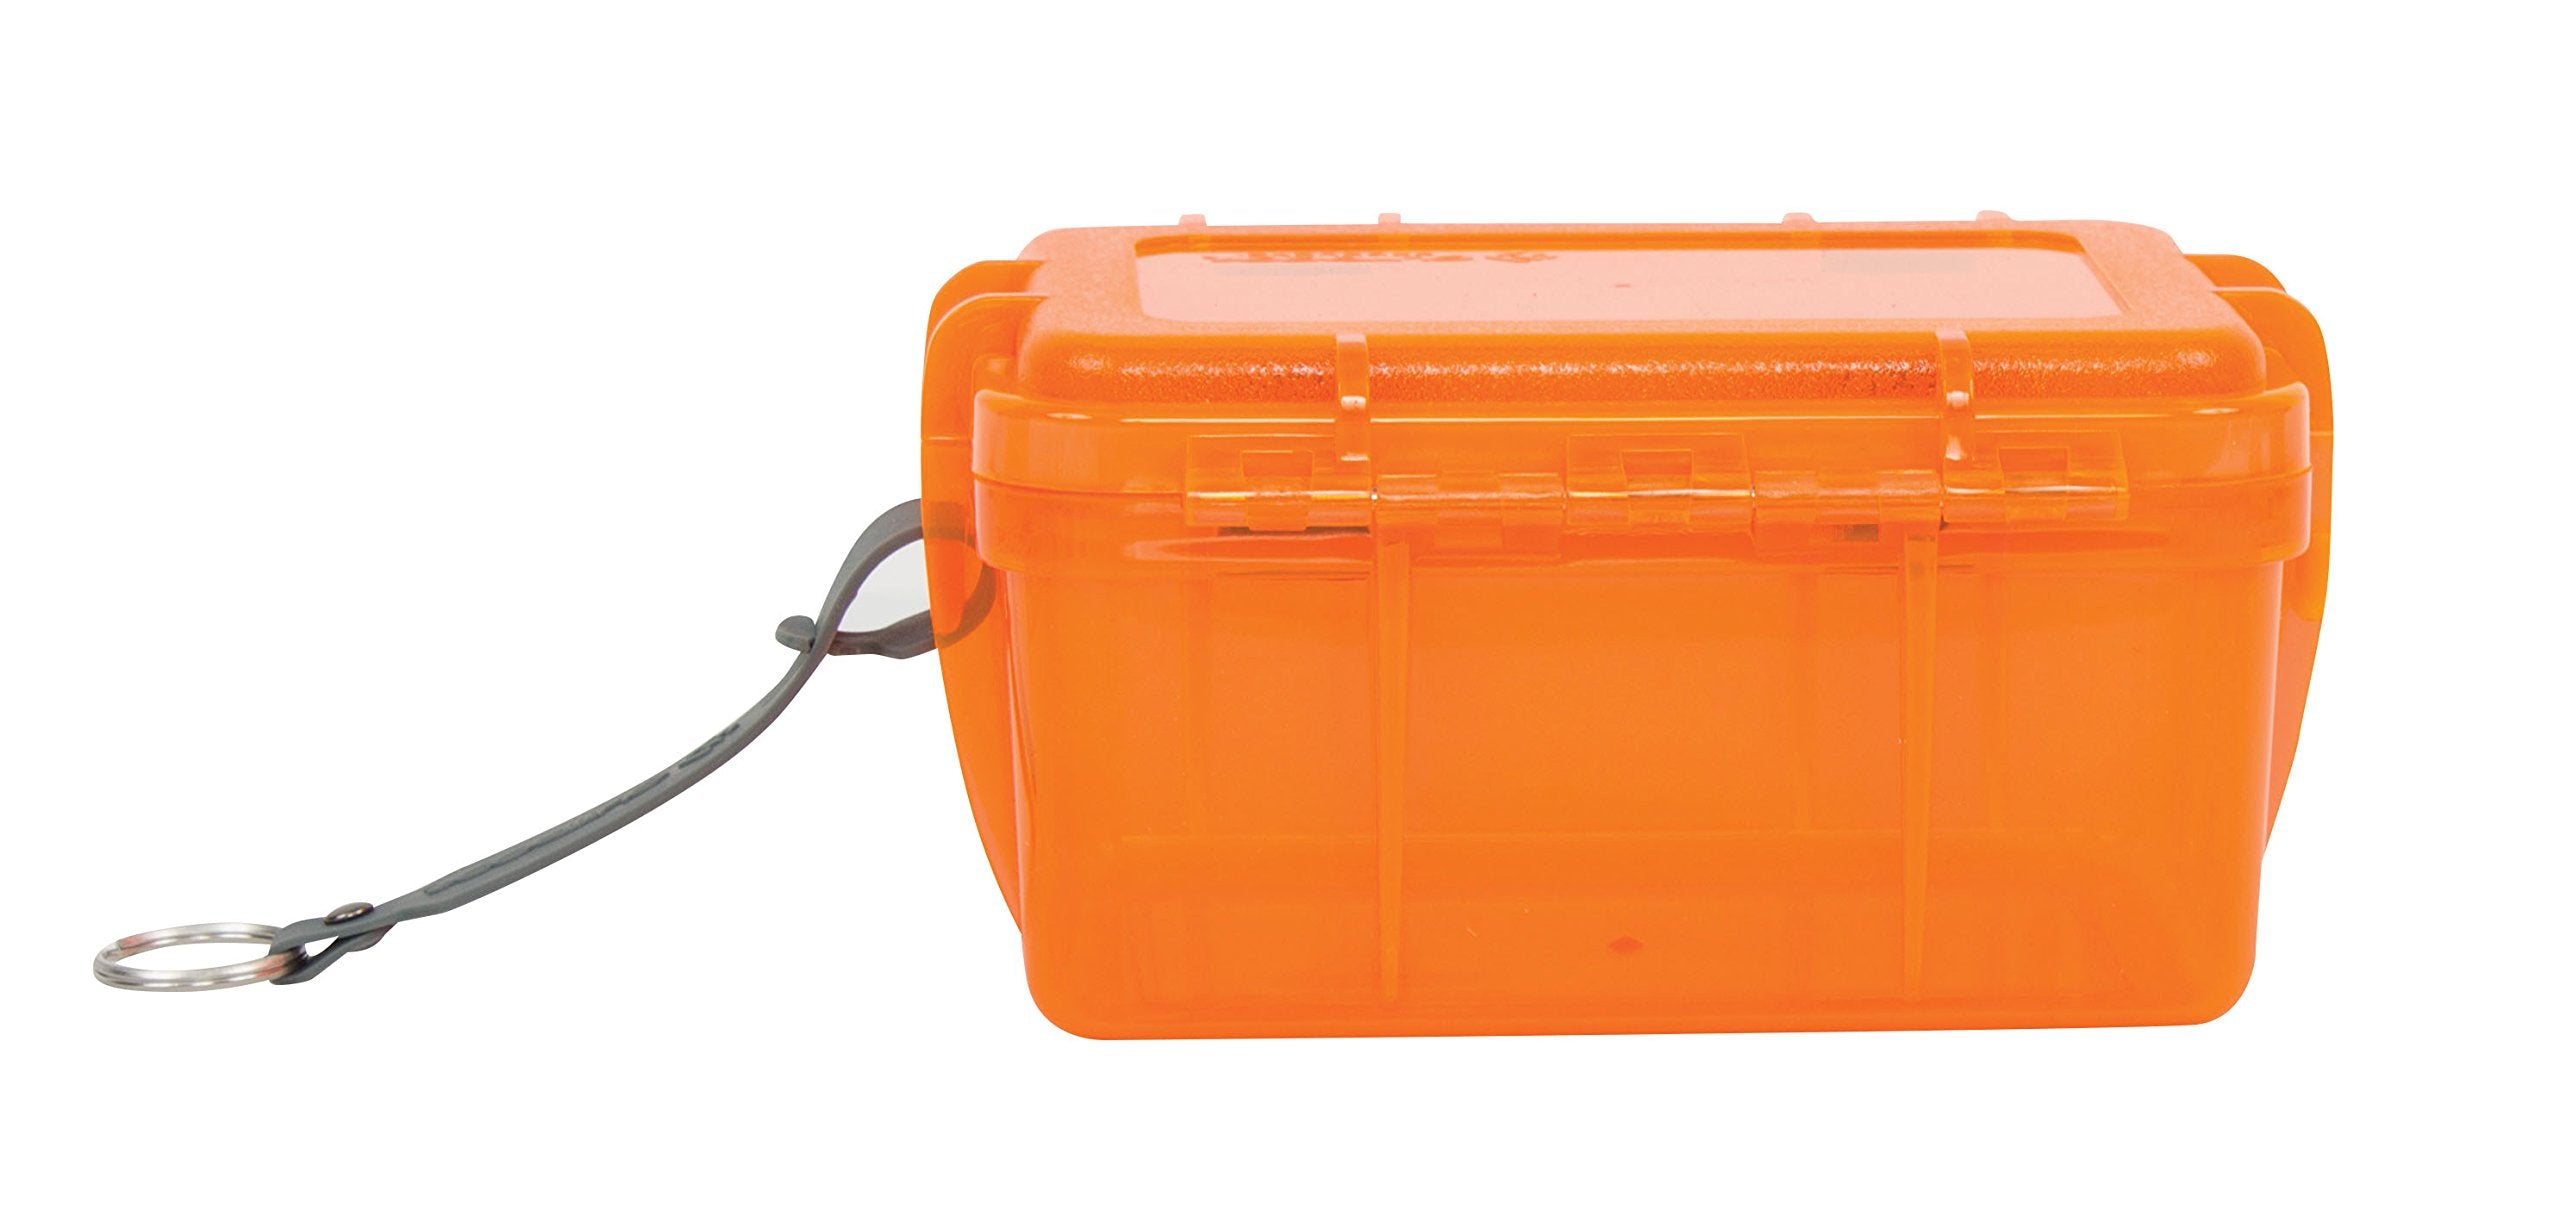 Outdoor Products Large Watertight Box